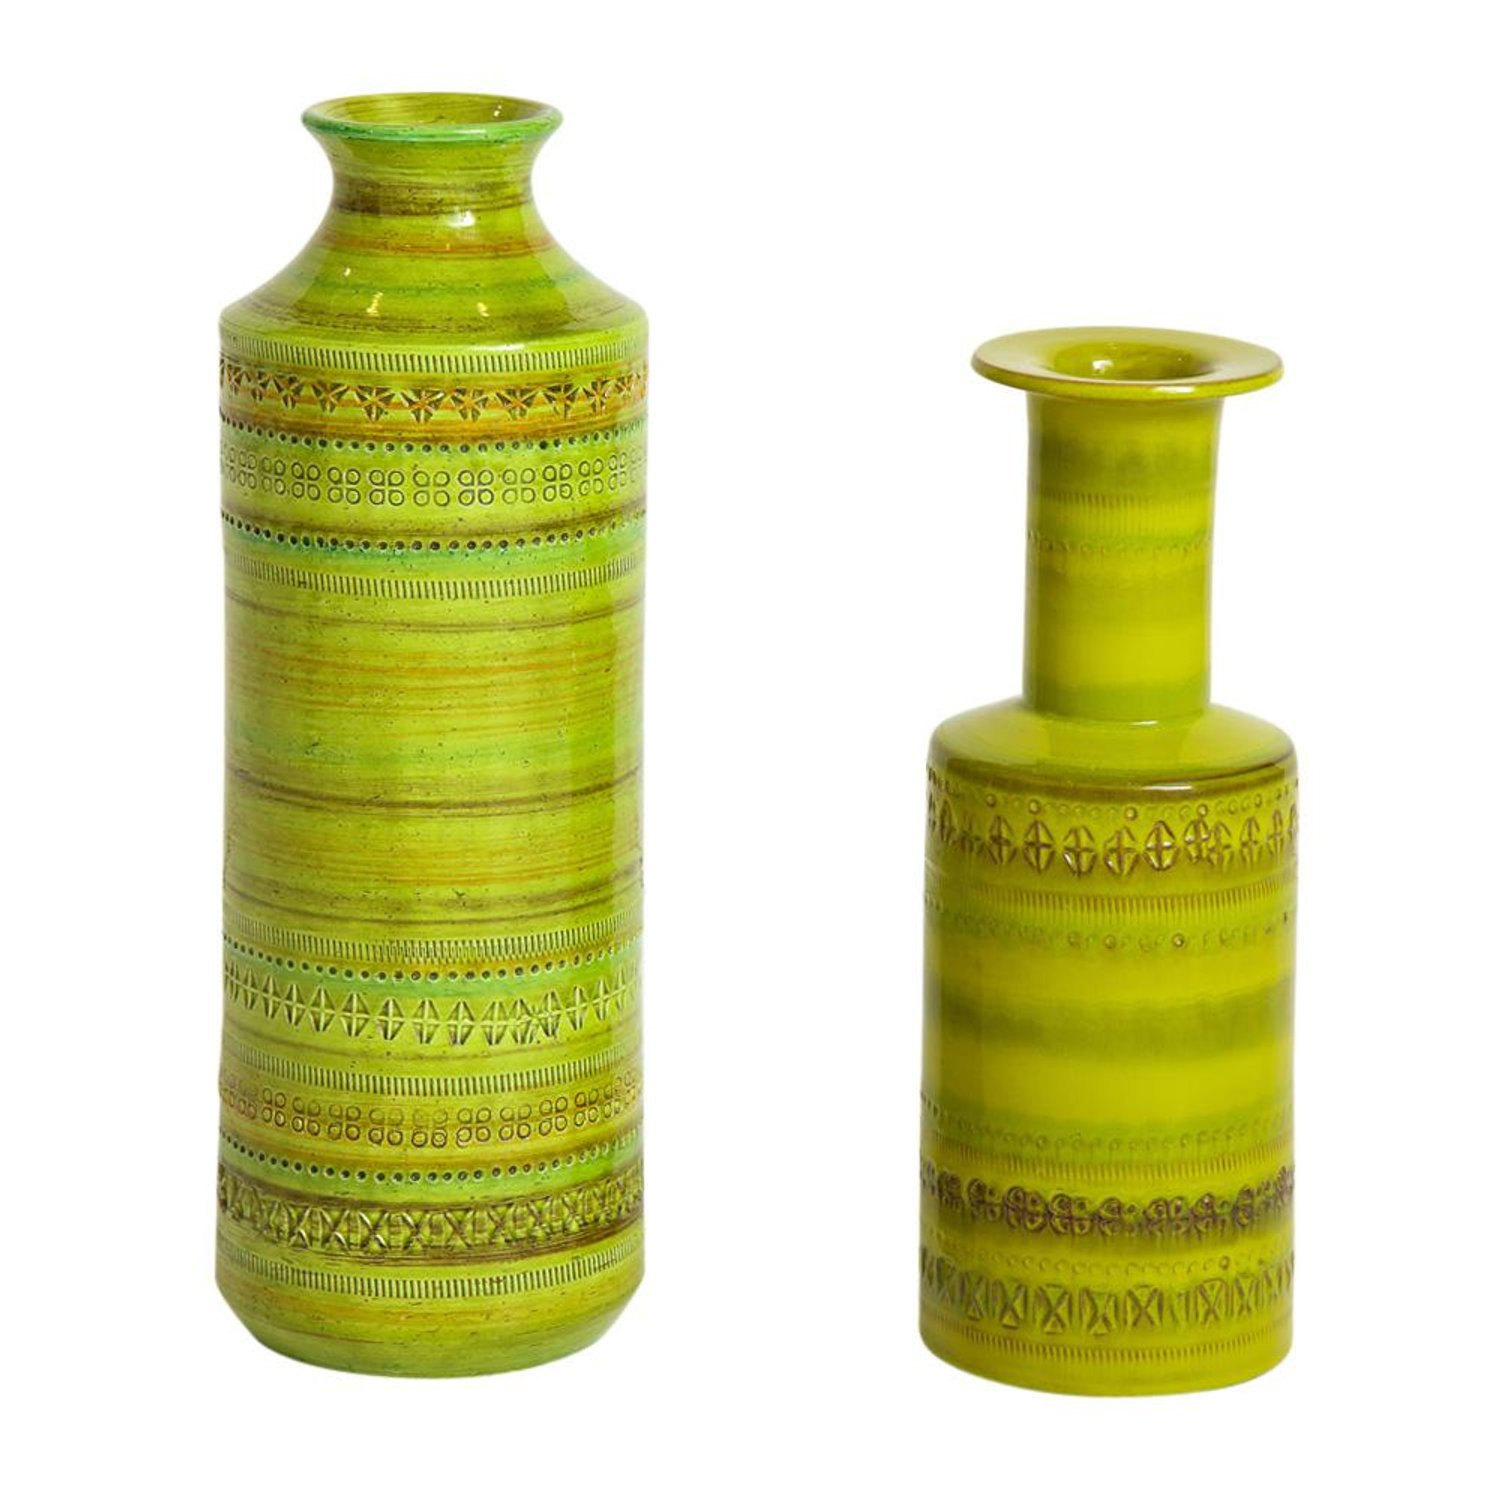 23 Awesome Green Glass Vases for Sale 2024 free download green glass vases for sale of bitossi ceramic vase rosenthal netter chartreuse signed italy 1960s inside bitossi ceramic vase rosenthal netter chartreuse signed italy 1960s for sale at 1stdi